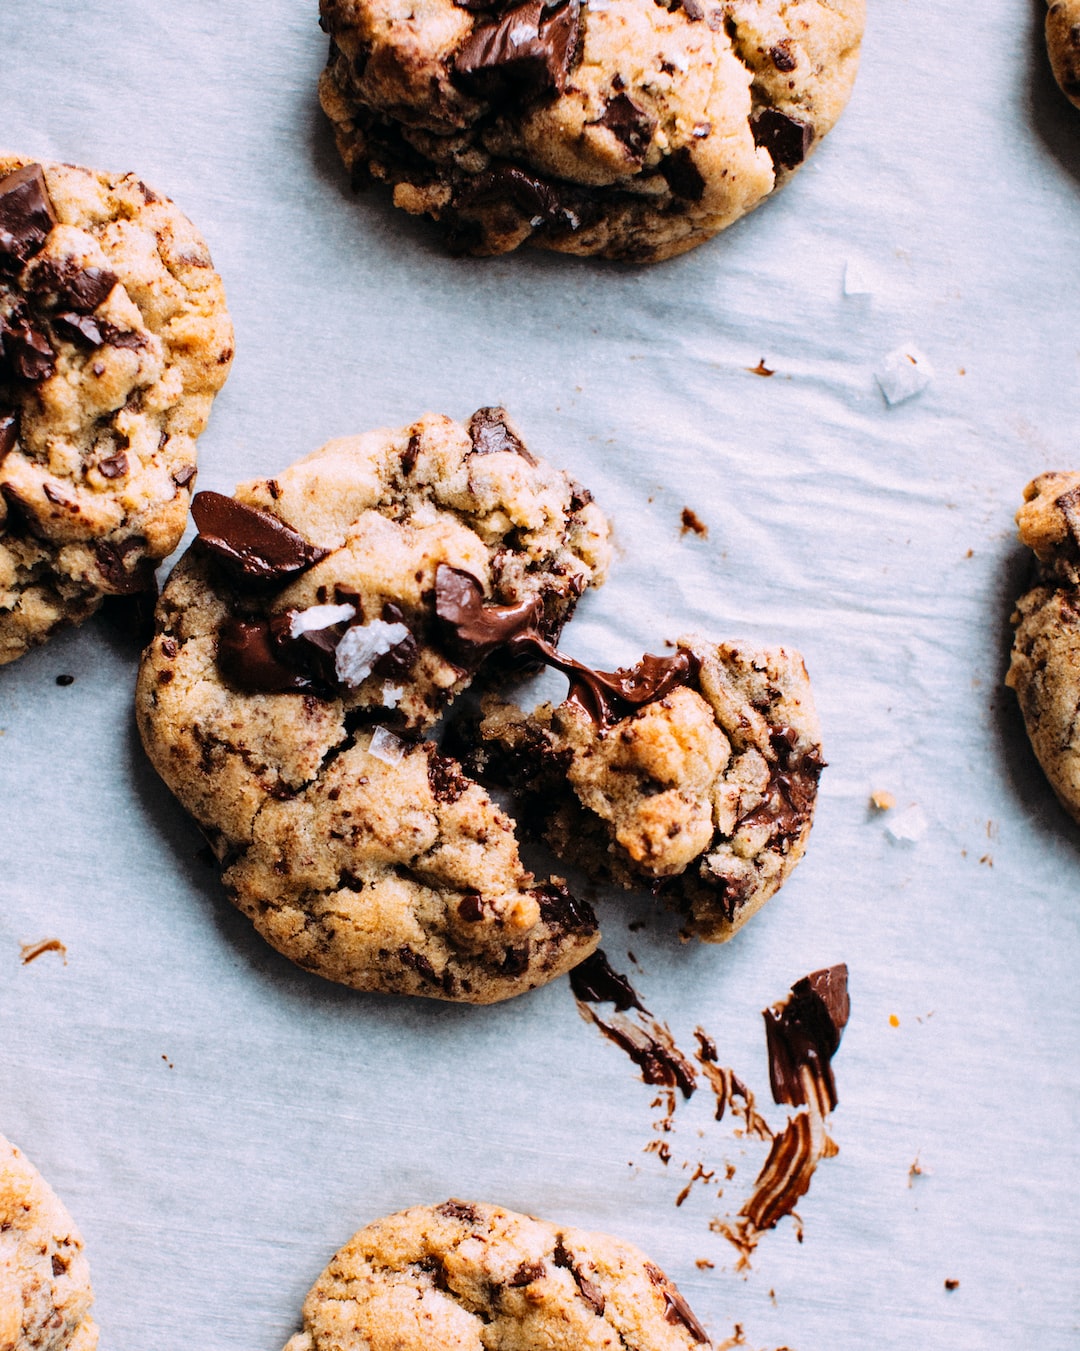 Melt-in-Your-Mouth Chocolate Chip Cookie Recipe